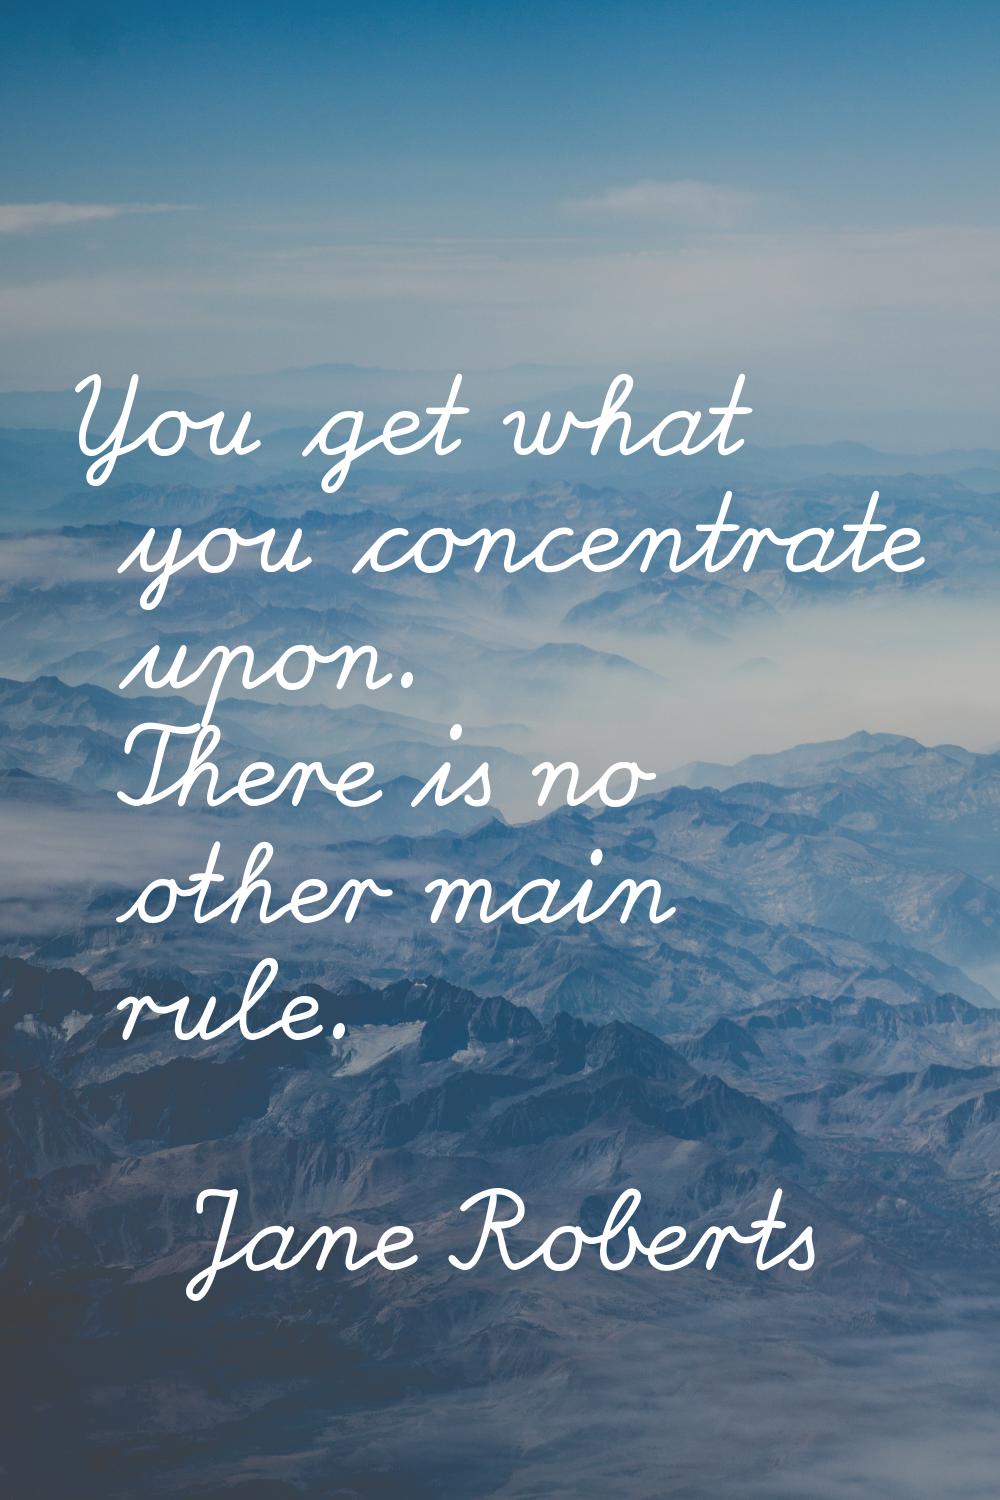 You get what you concentrate upon. There is no other main rule.